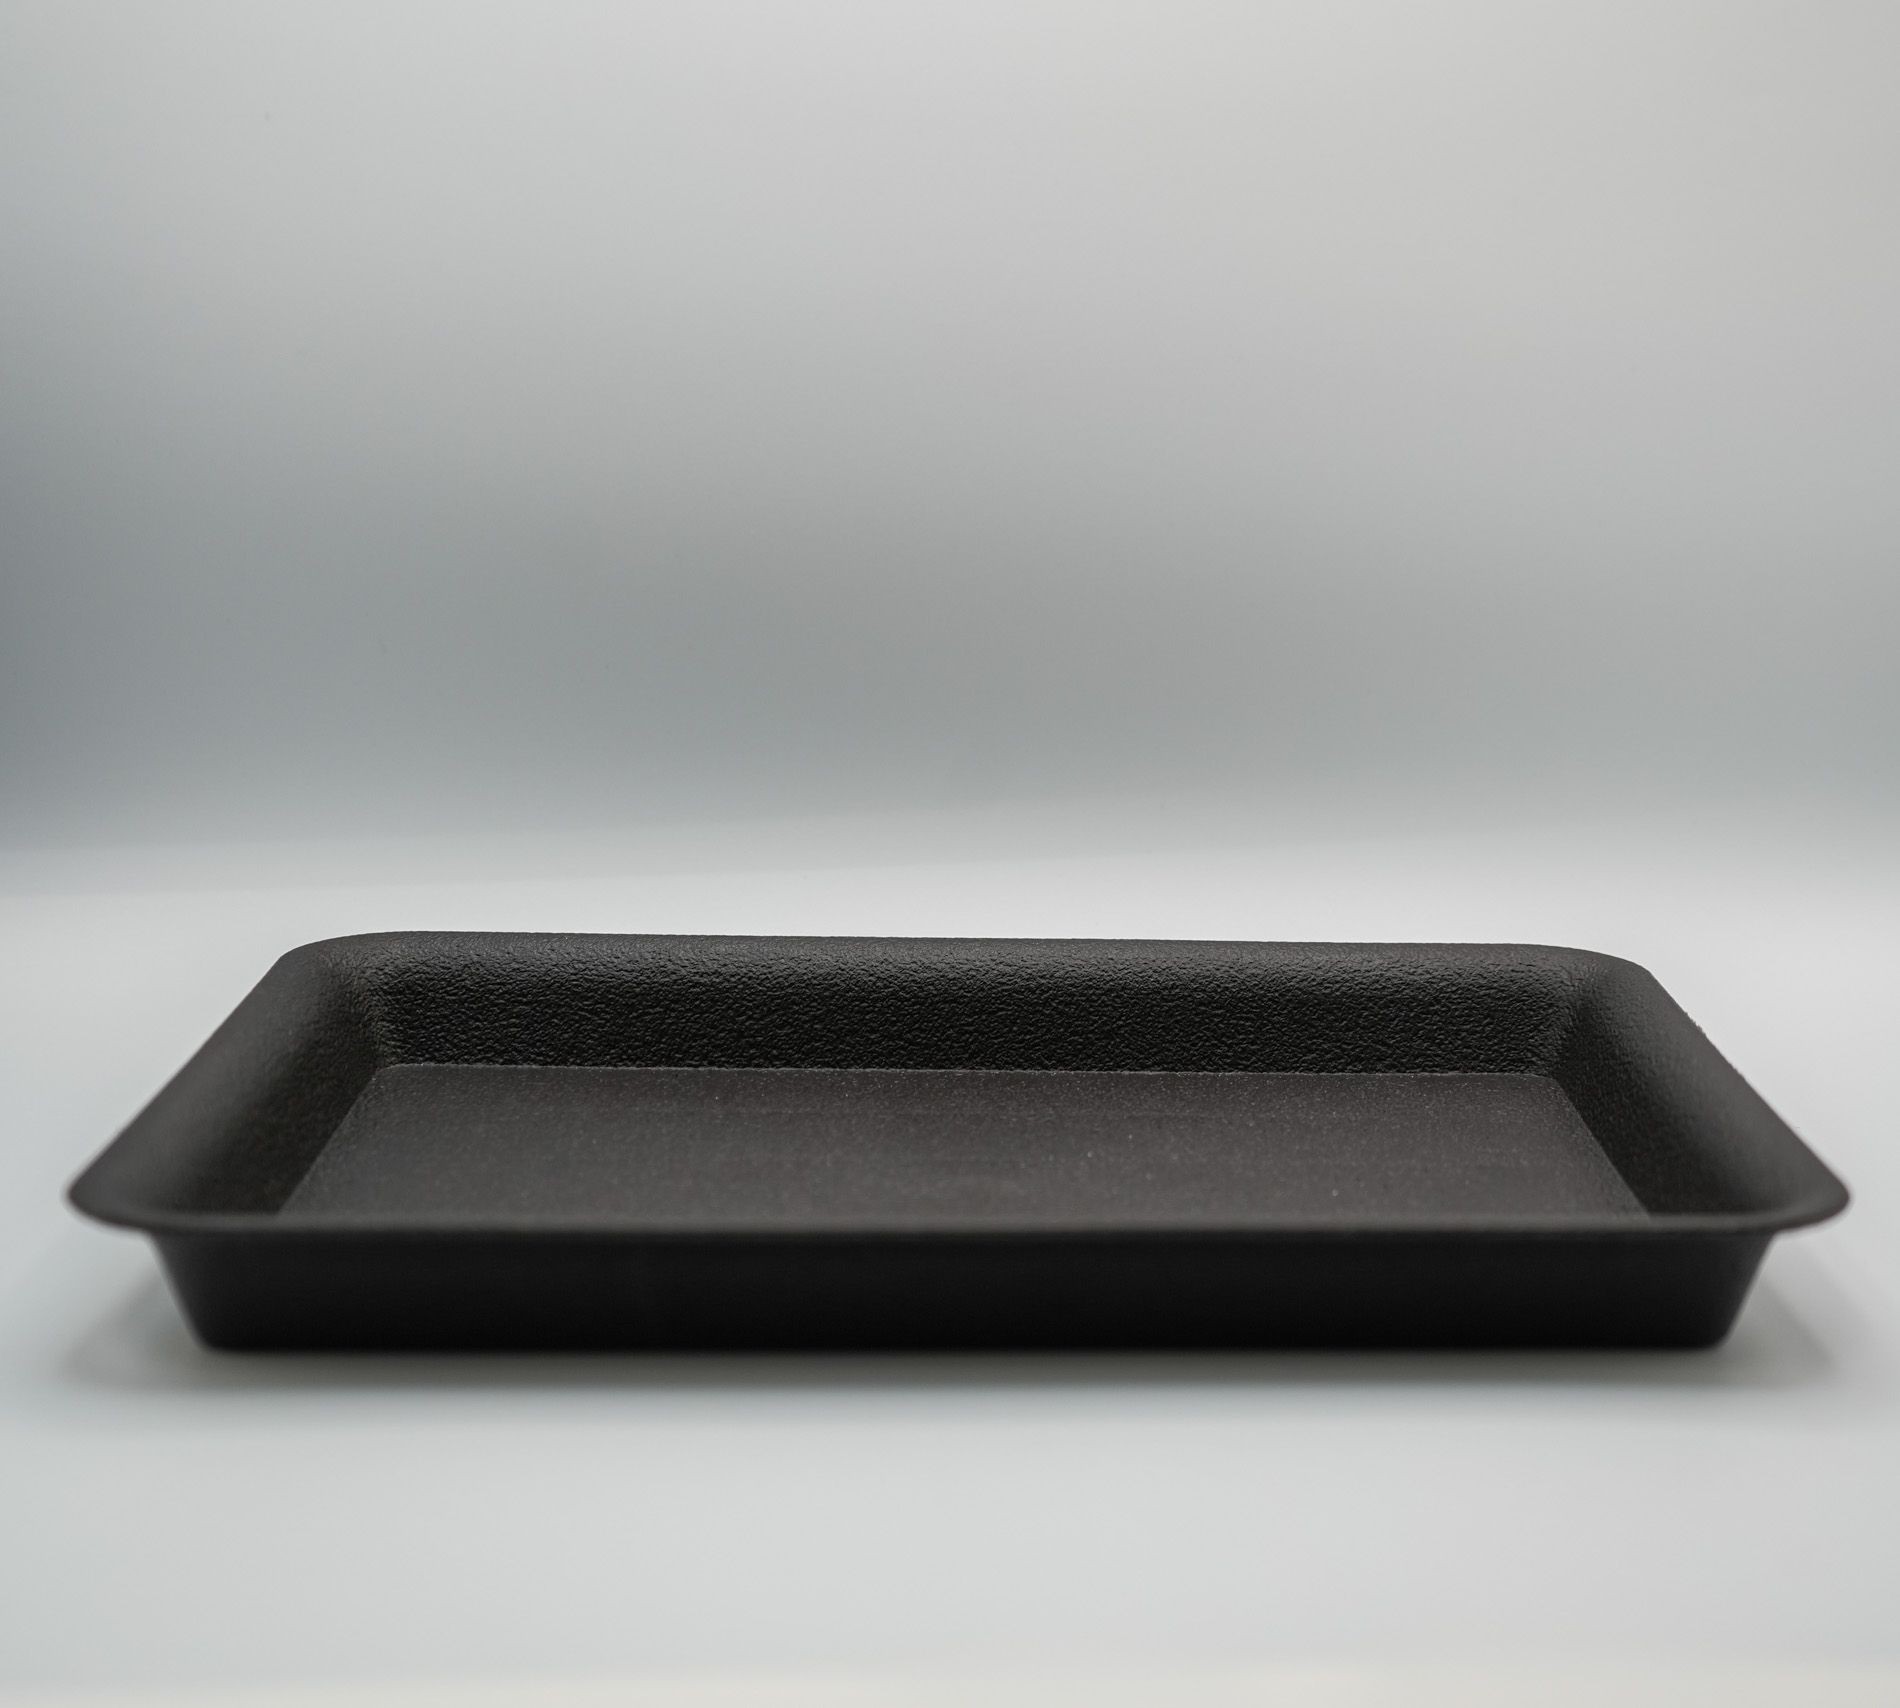 8x6x4 humidity tray for your 8 inch bonsai pot